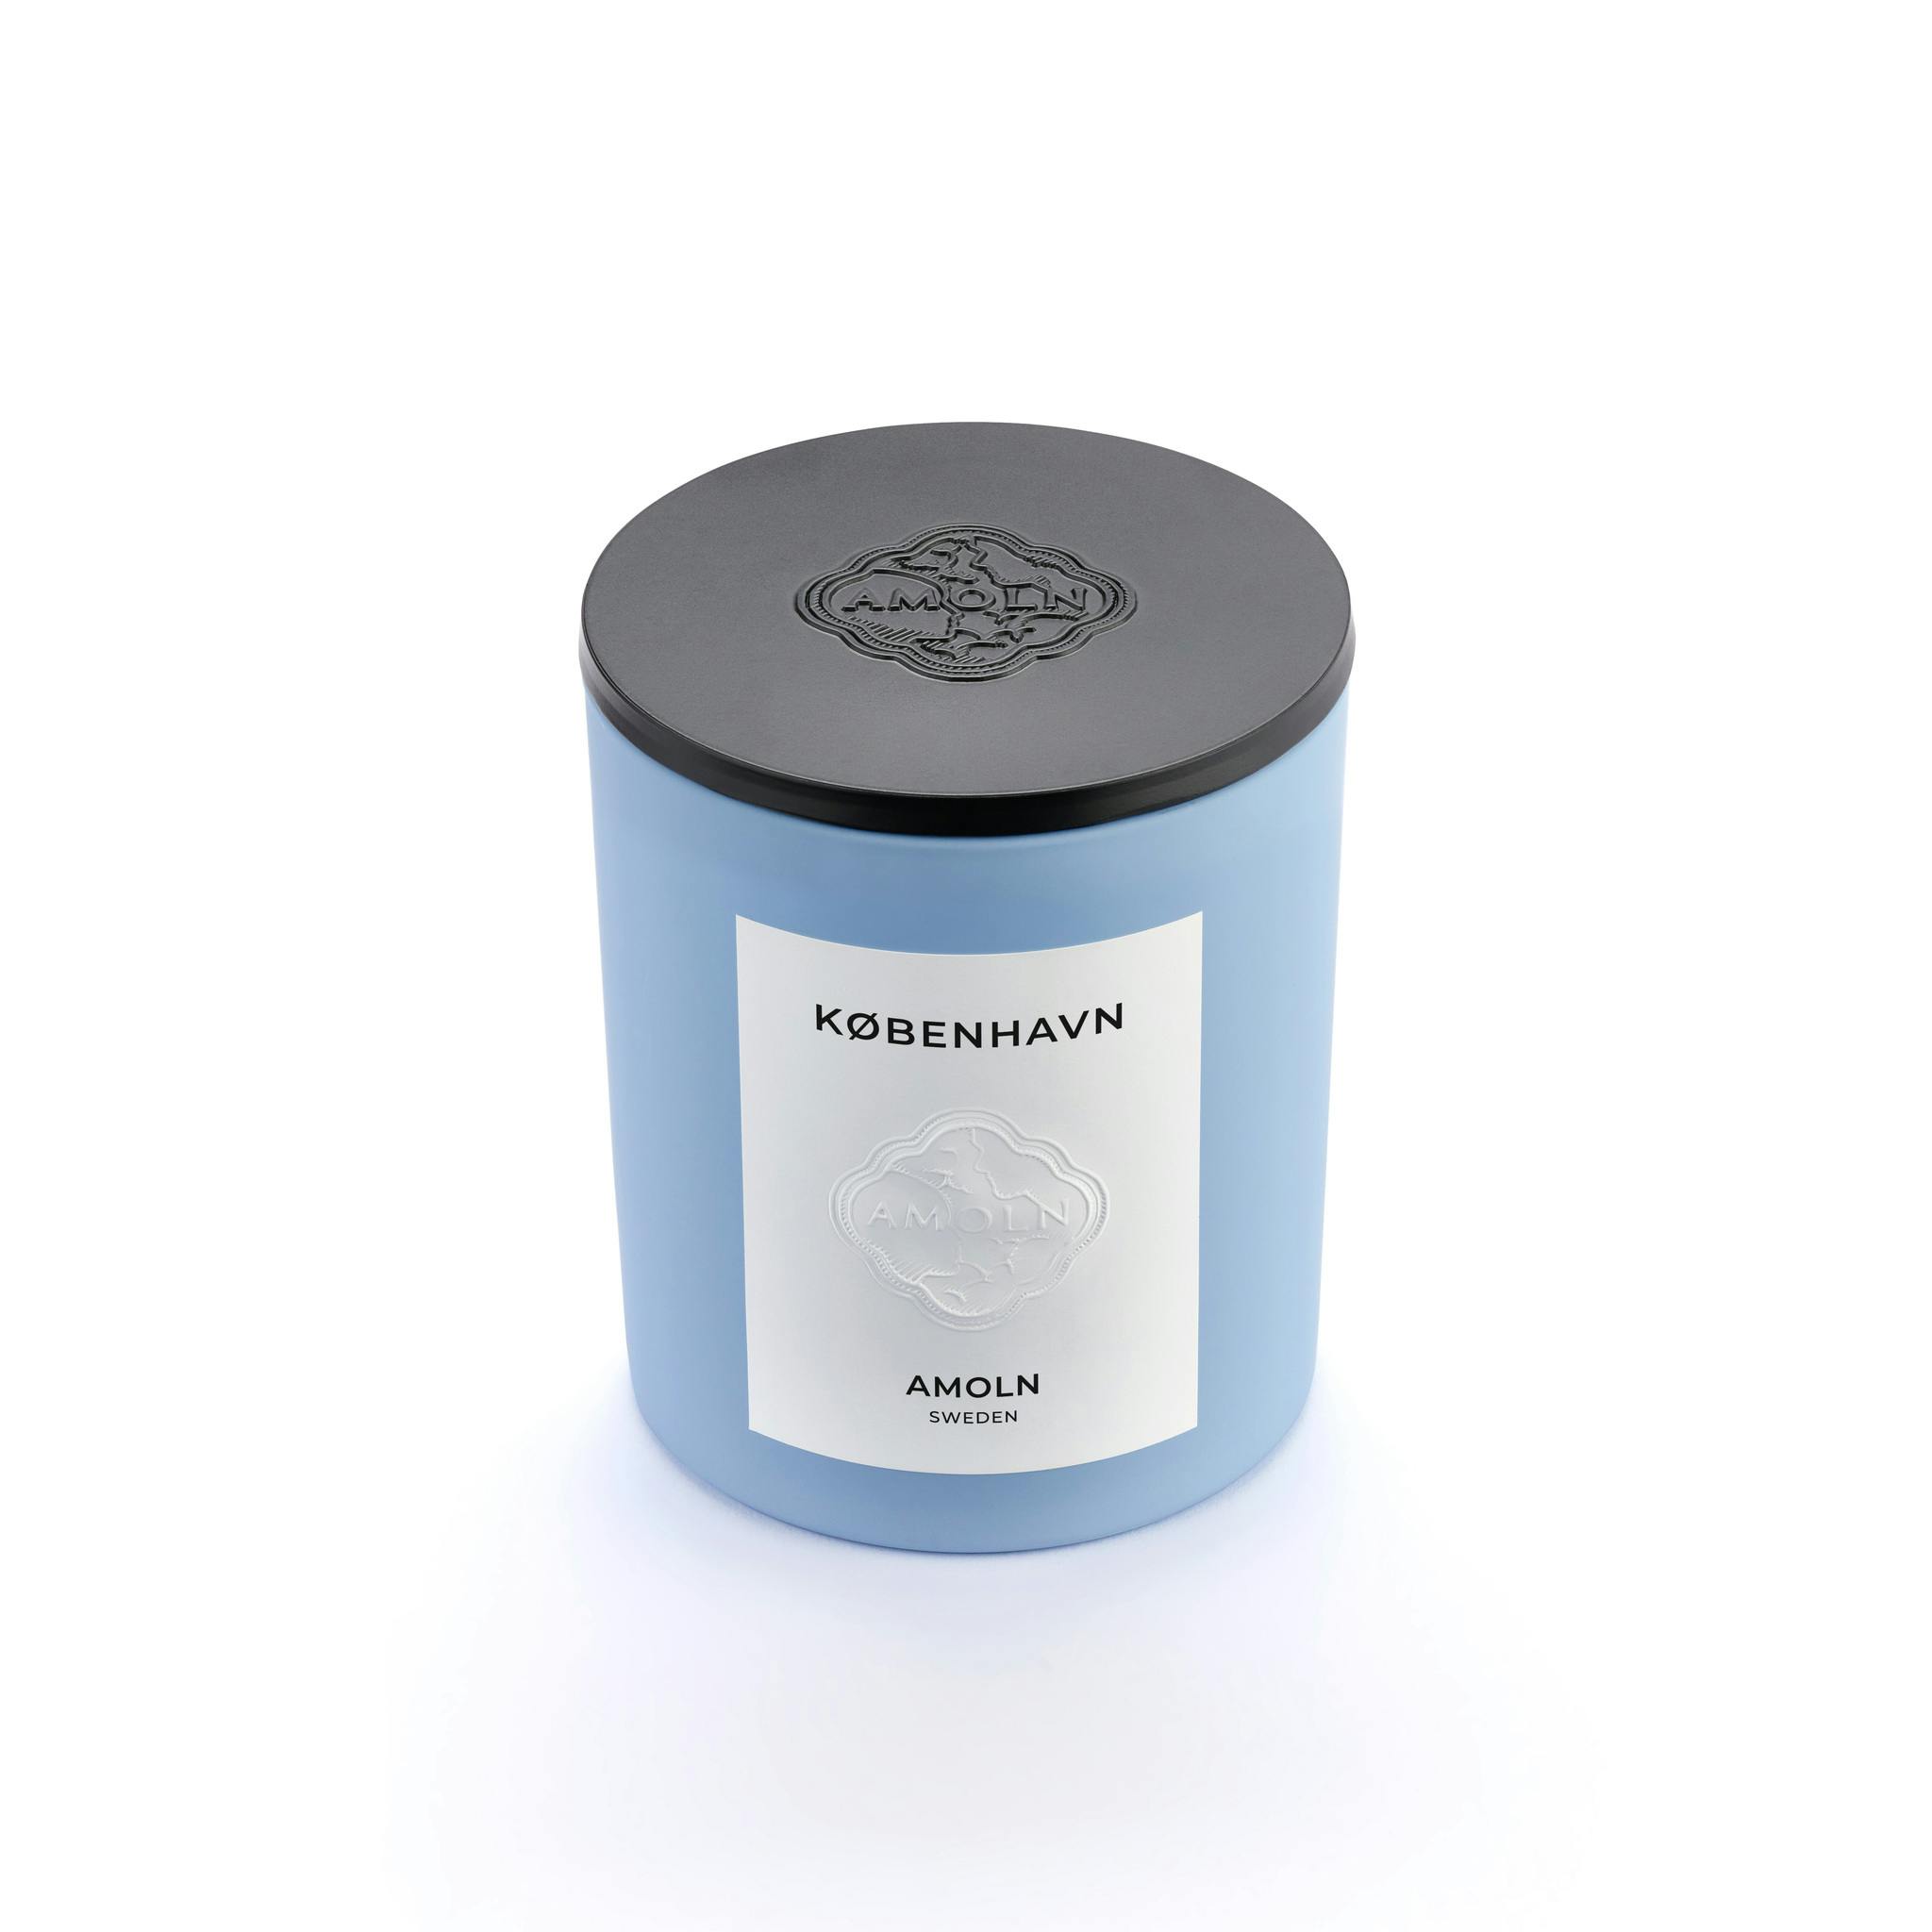 Light blue ceramic candle jar with a vegan, scented candle in blue wax & black metal embossed lid. Handcrafted by artisans in Sweden. Sustainably & ethically made.